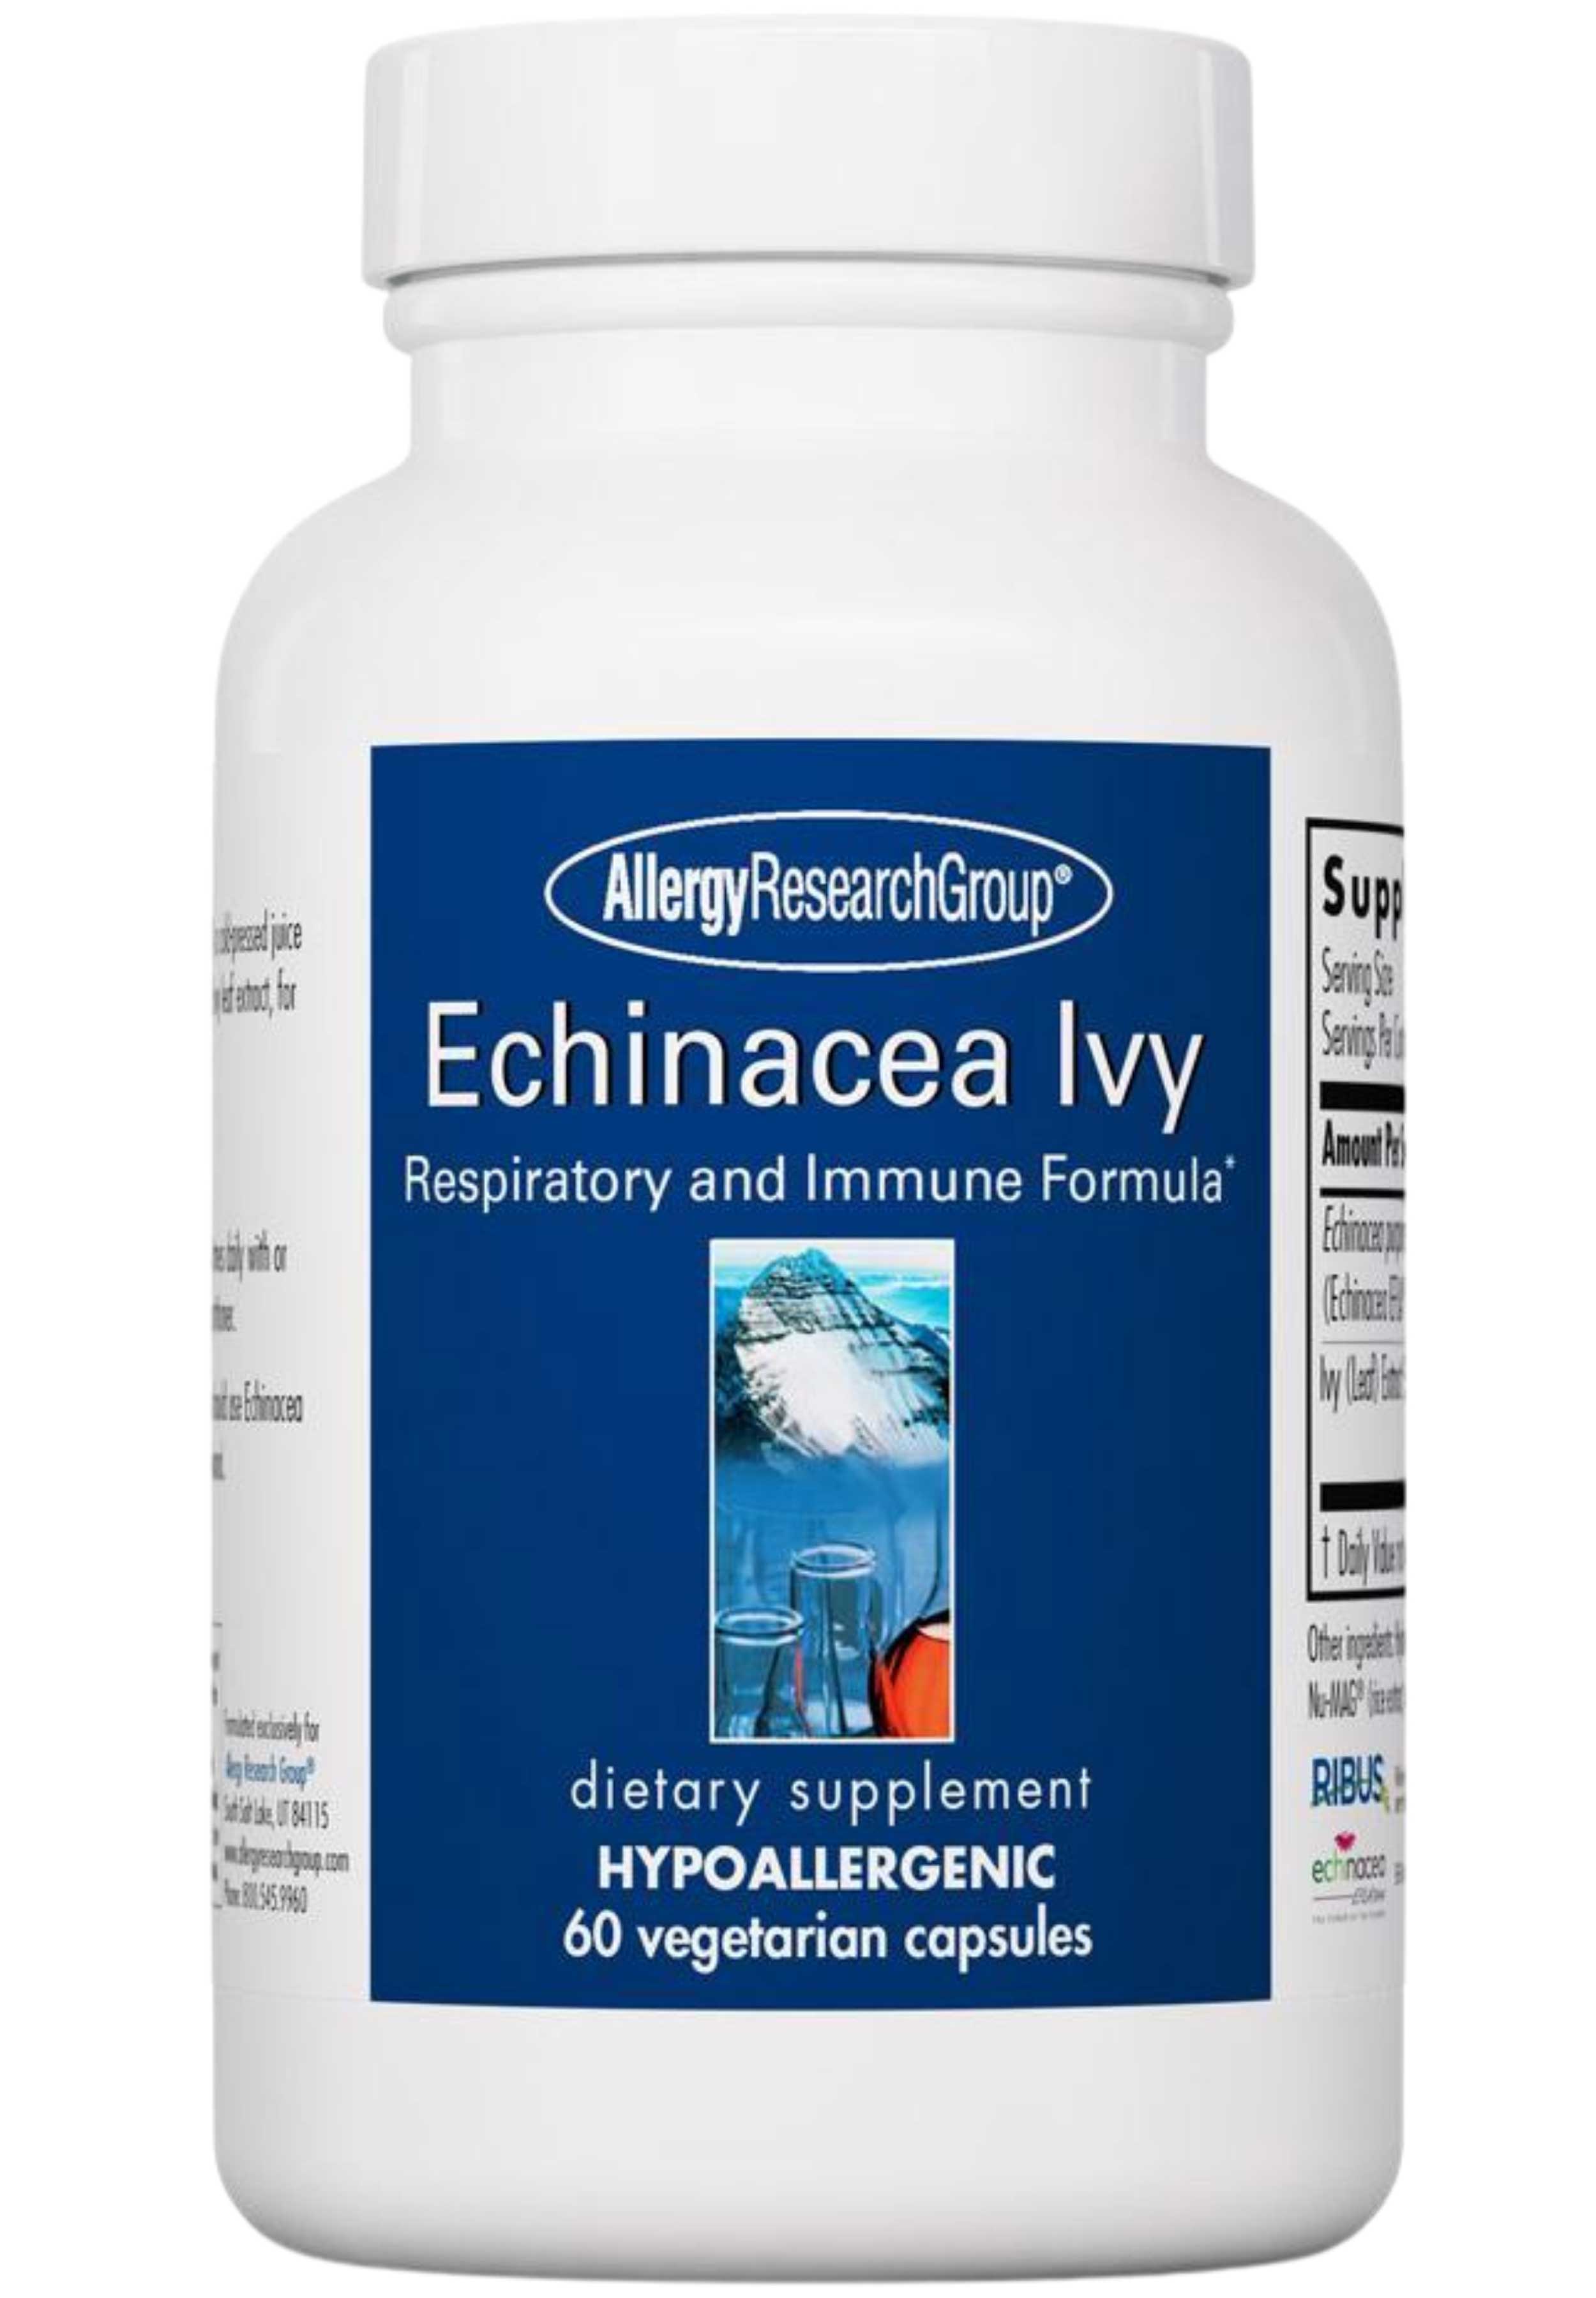 Allergy Research Group Echinacea Ivy